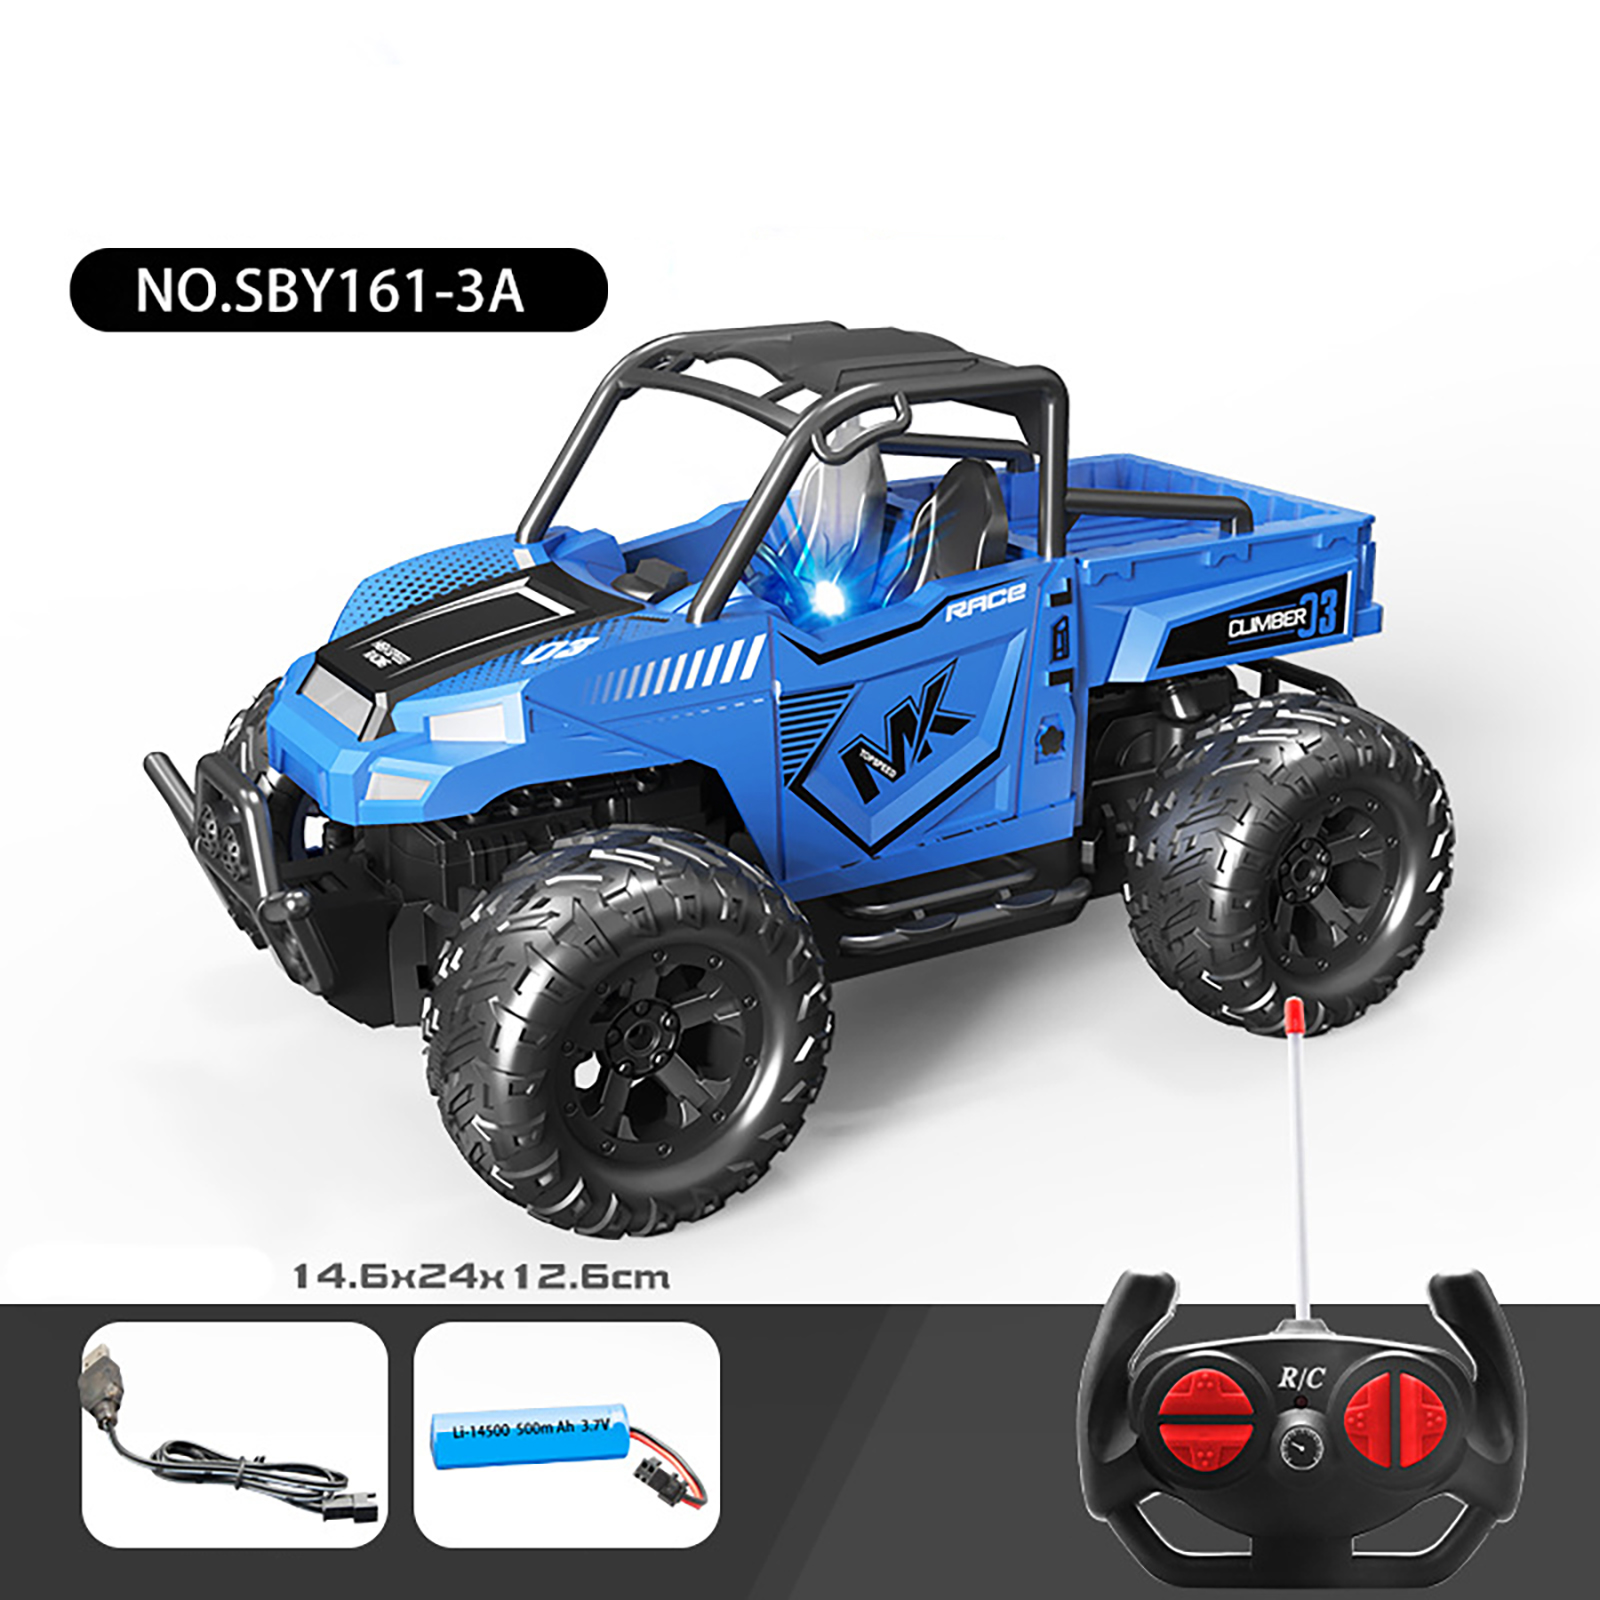 1:16 Scale RC Car 2.4GHz Off-road Vehicle Toys Remote Control Climbing Car Model